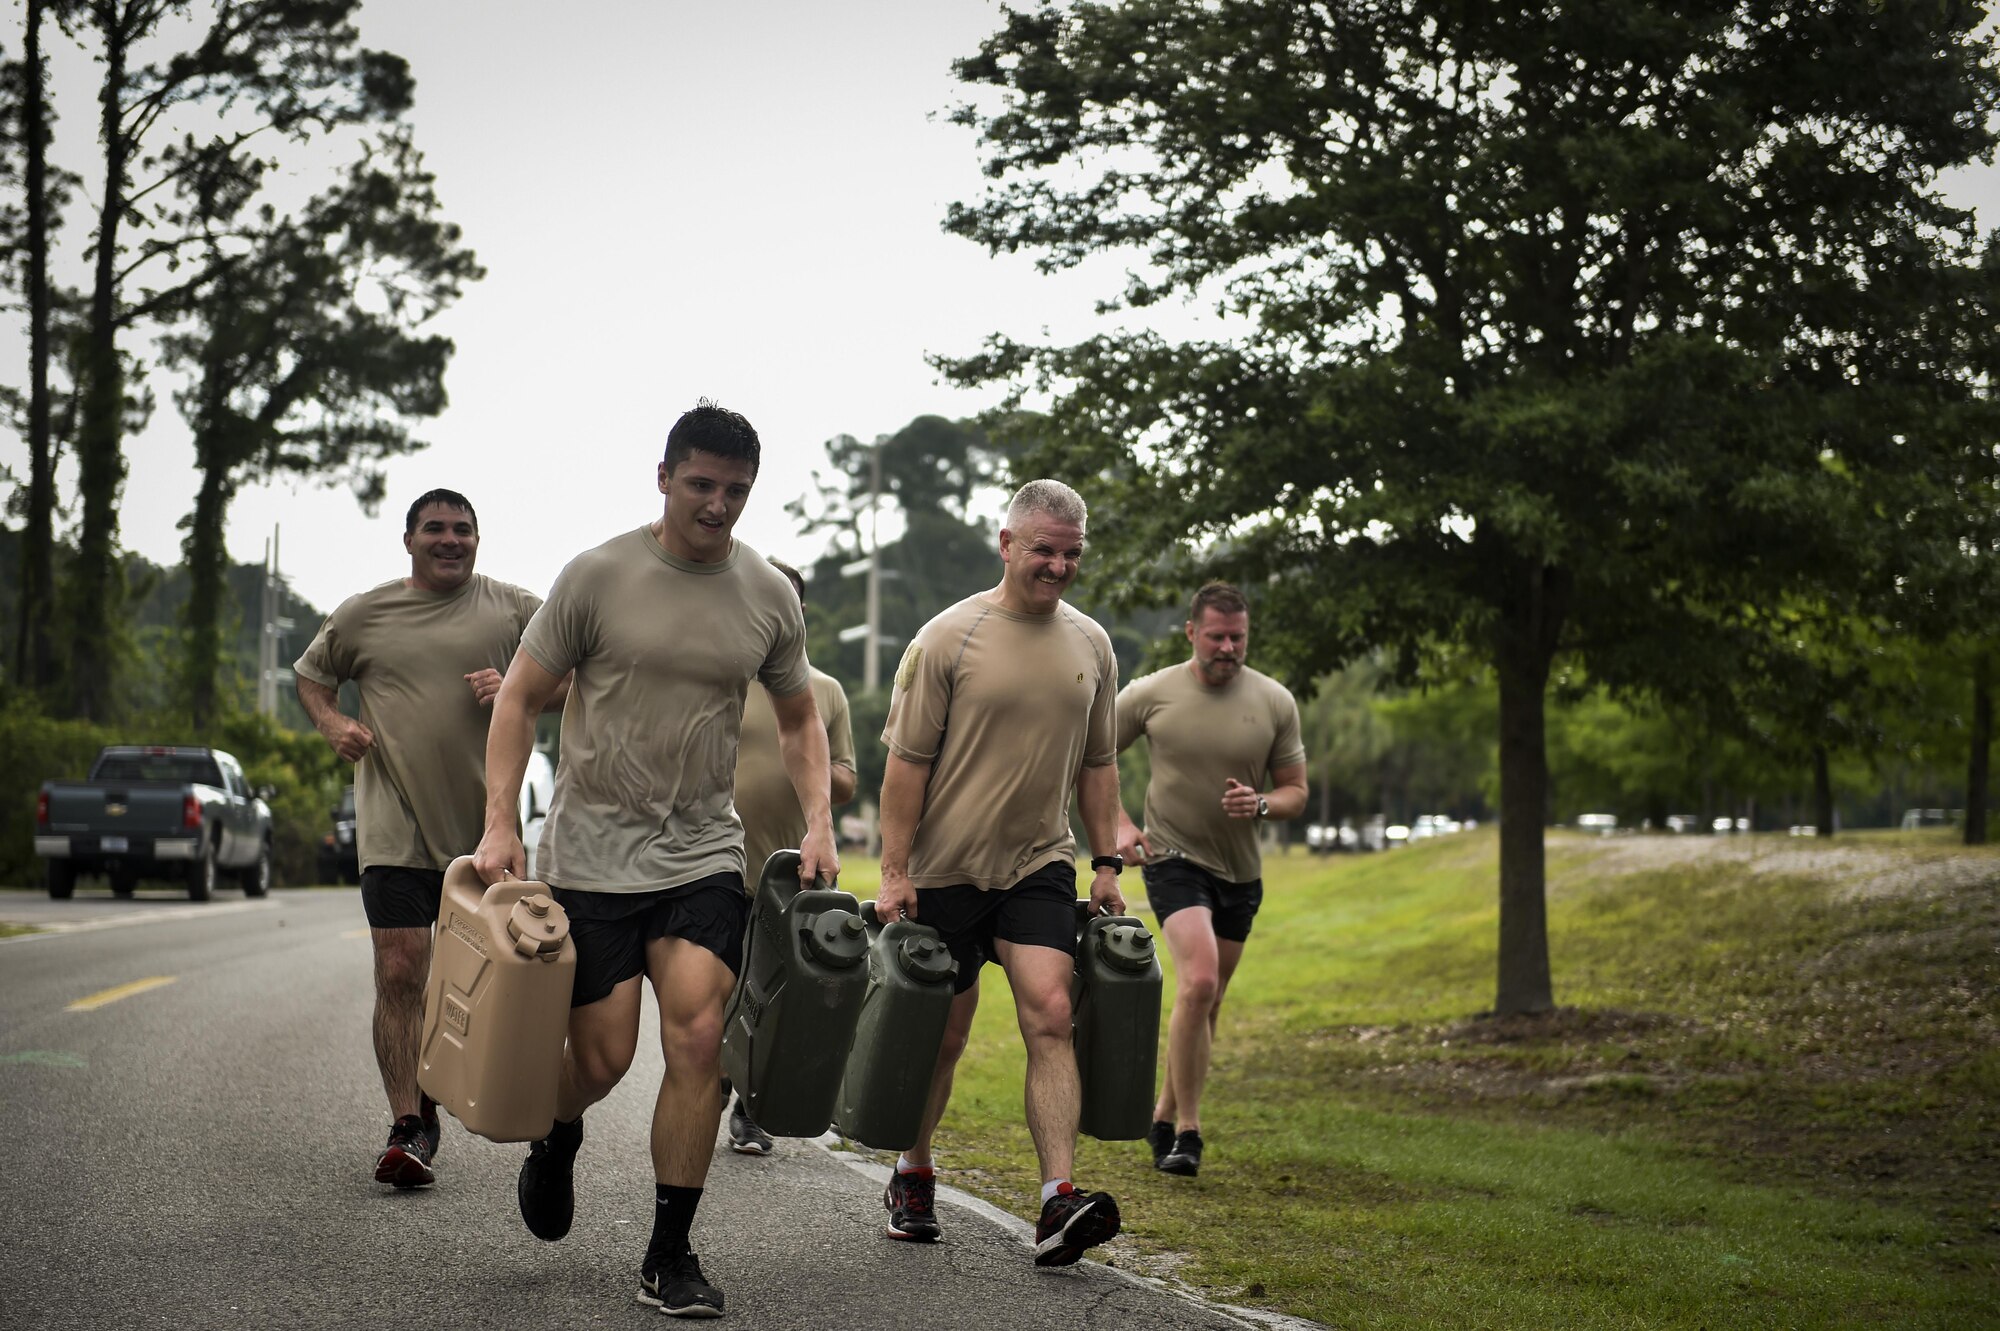 Monster Mash Team 4 finishes an obstacle course carrying 50-pound fuel containers at Hurlburt Field, Fla., May 12, 2016. Monster Mash is a long-standing Special Tactics training tradition, consisting of an obstacle course where special operators complete timed scenarios at different stations of core mission training. The event was held in honor of Chief Master Sgt. Bruce W. Dixon, the command chief of the 24th Special Operations Wing, who is retiring after a 30-year career as a combat controller. (U.S. Air Force photo by Senior Airman Ryan Conroy)   